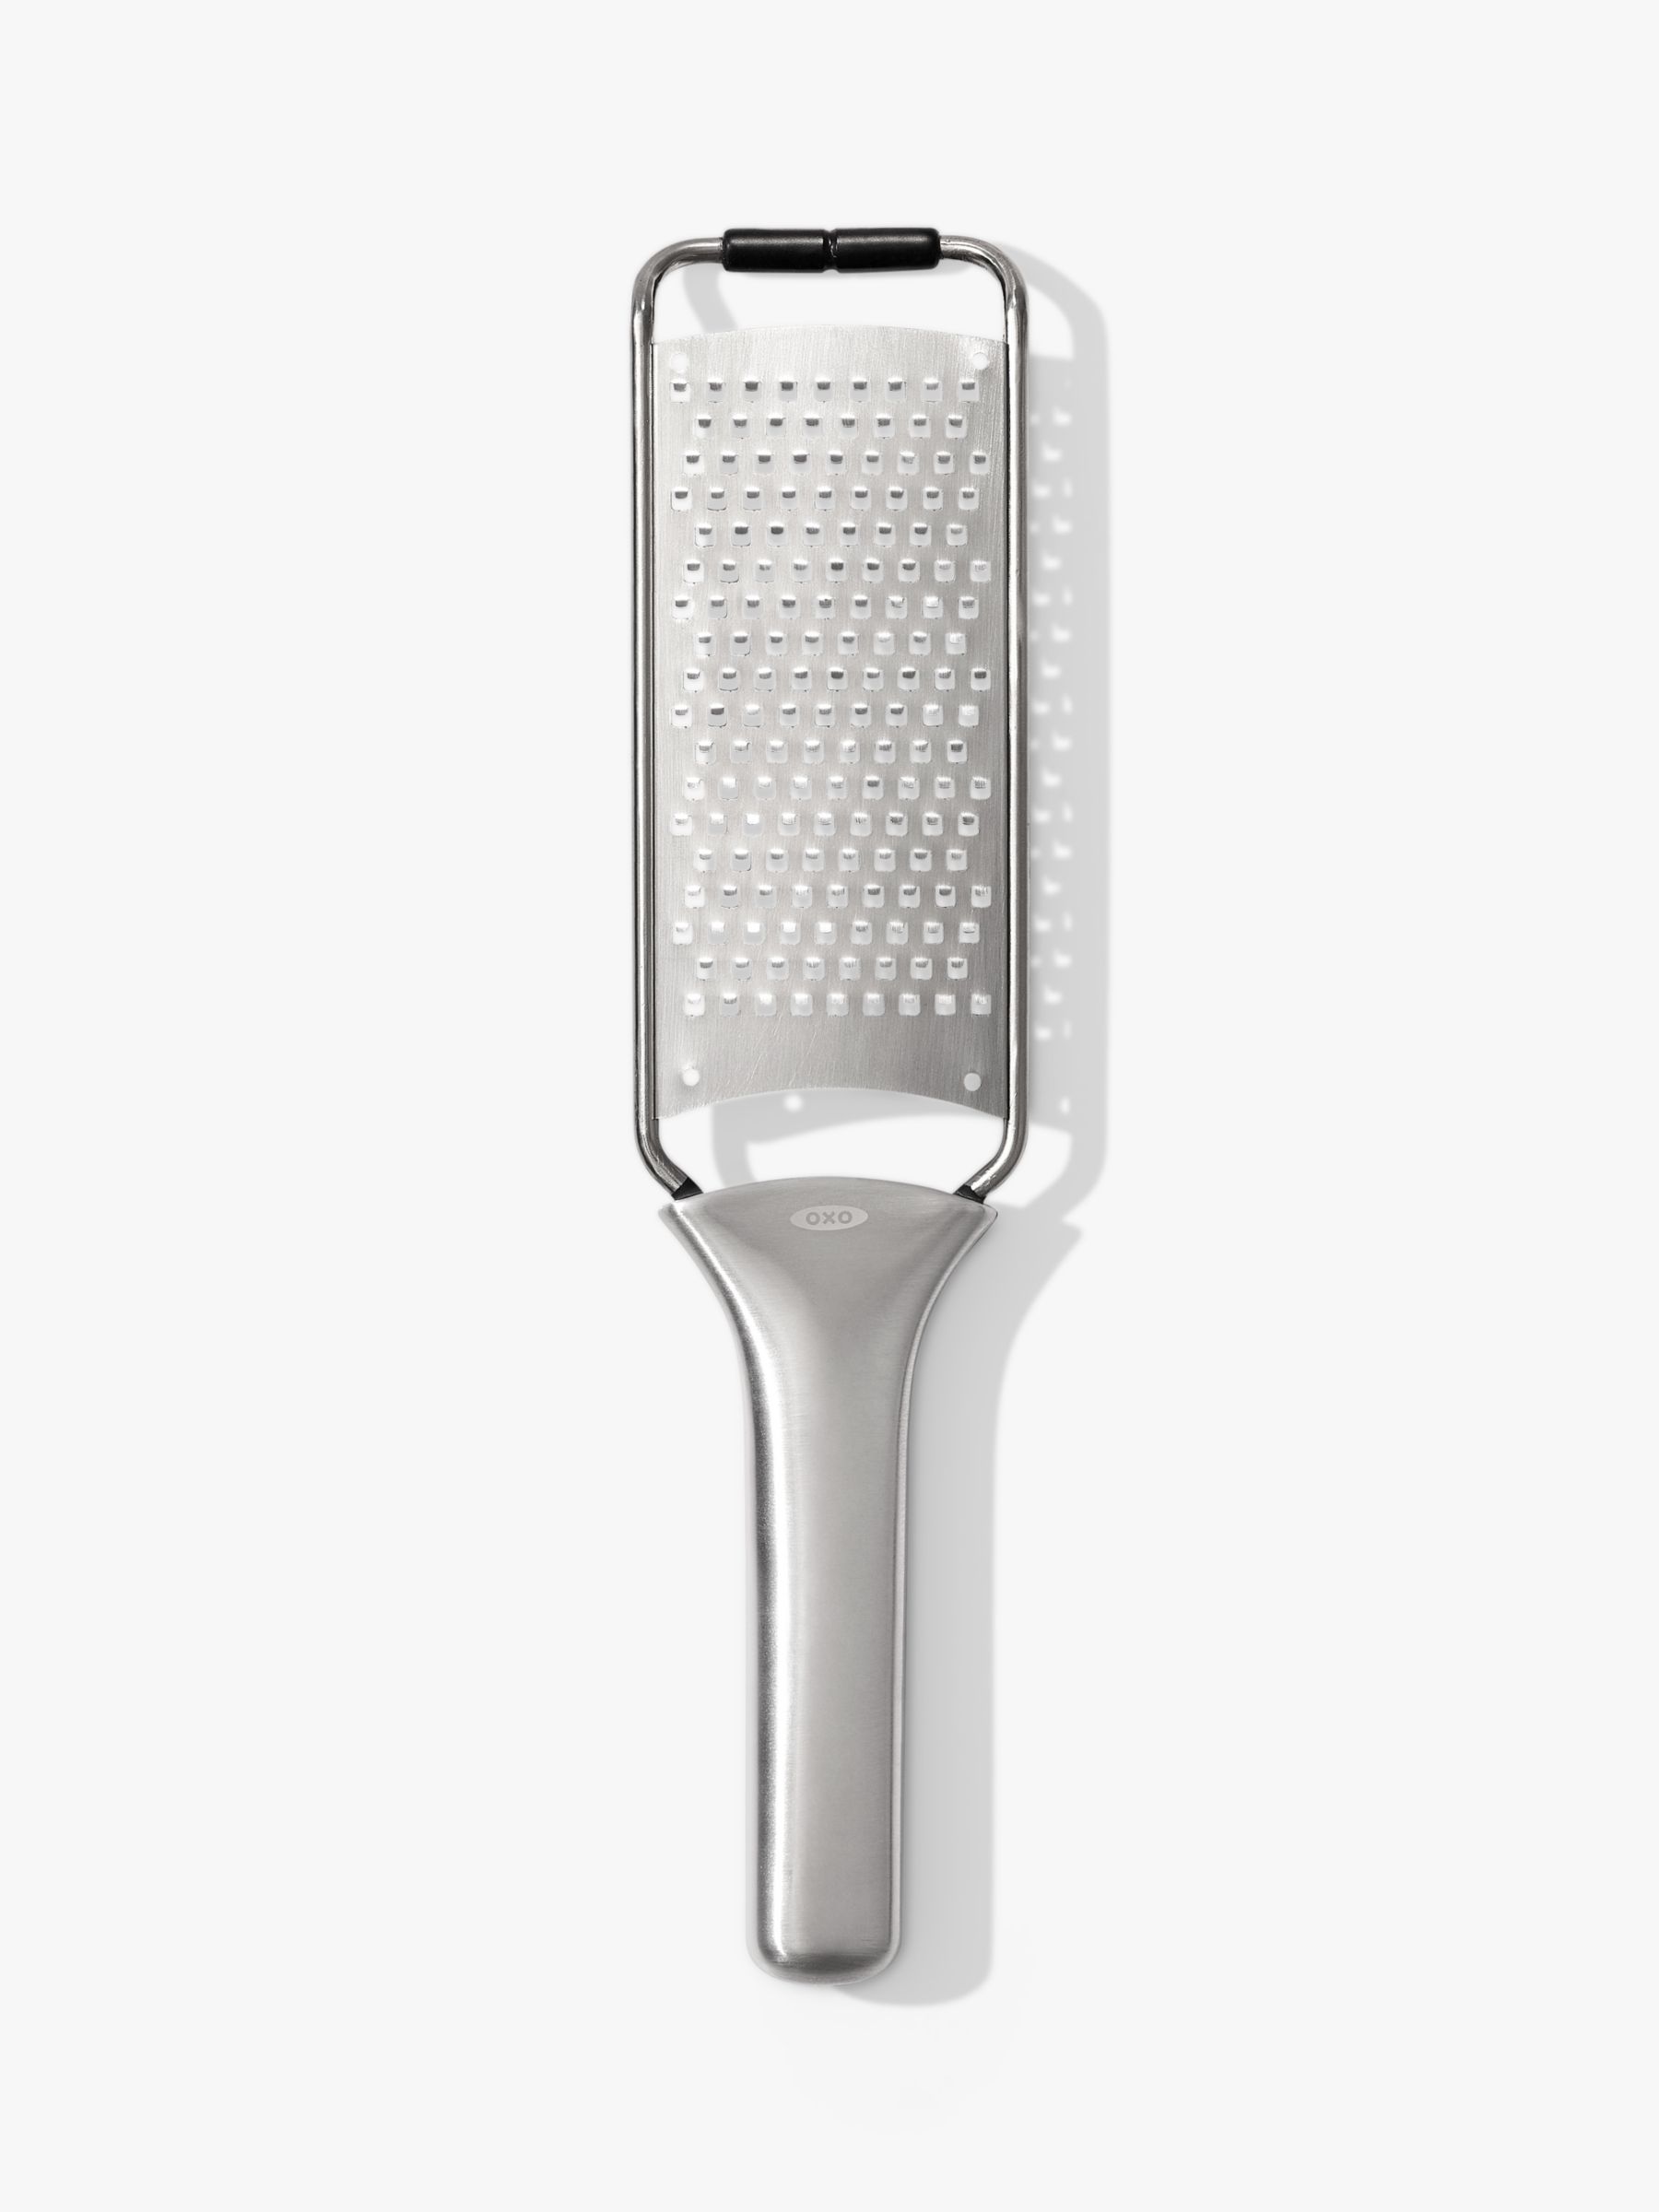 Riess Stainless Steel 2 Way Grater